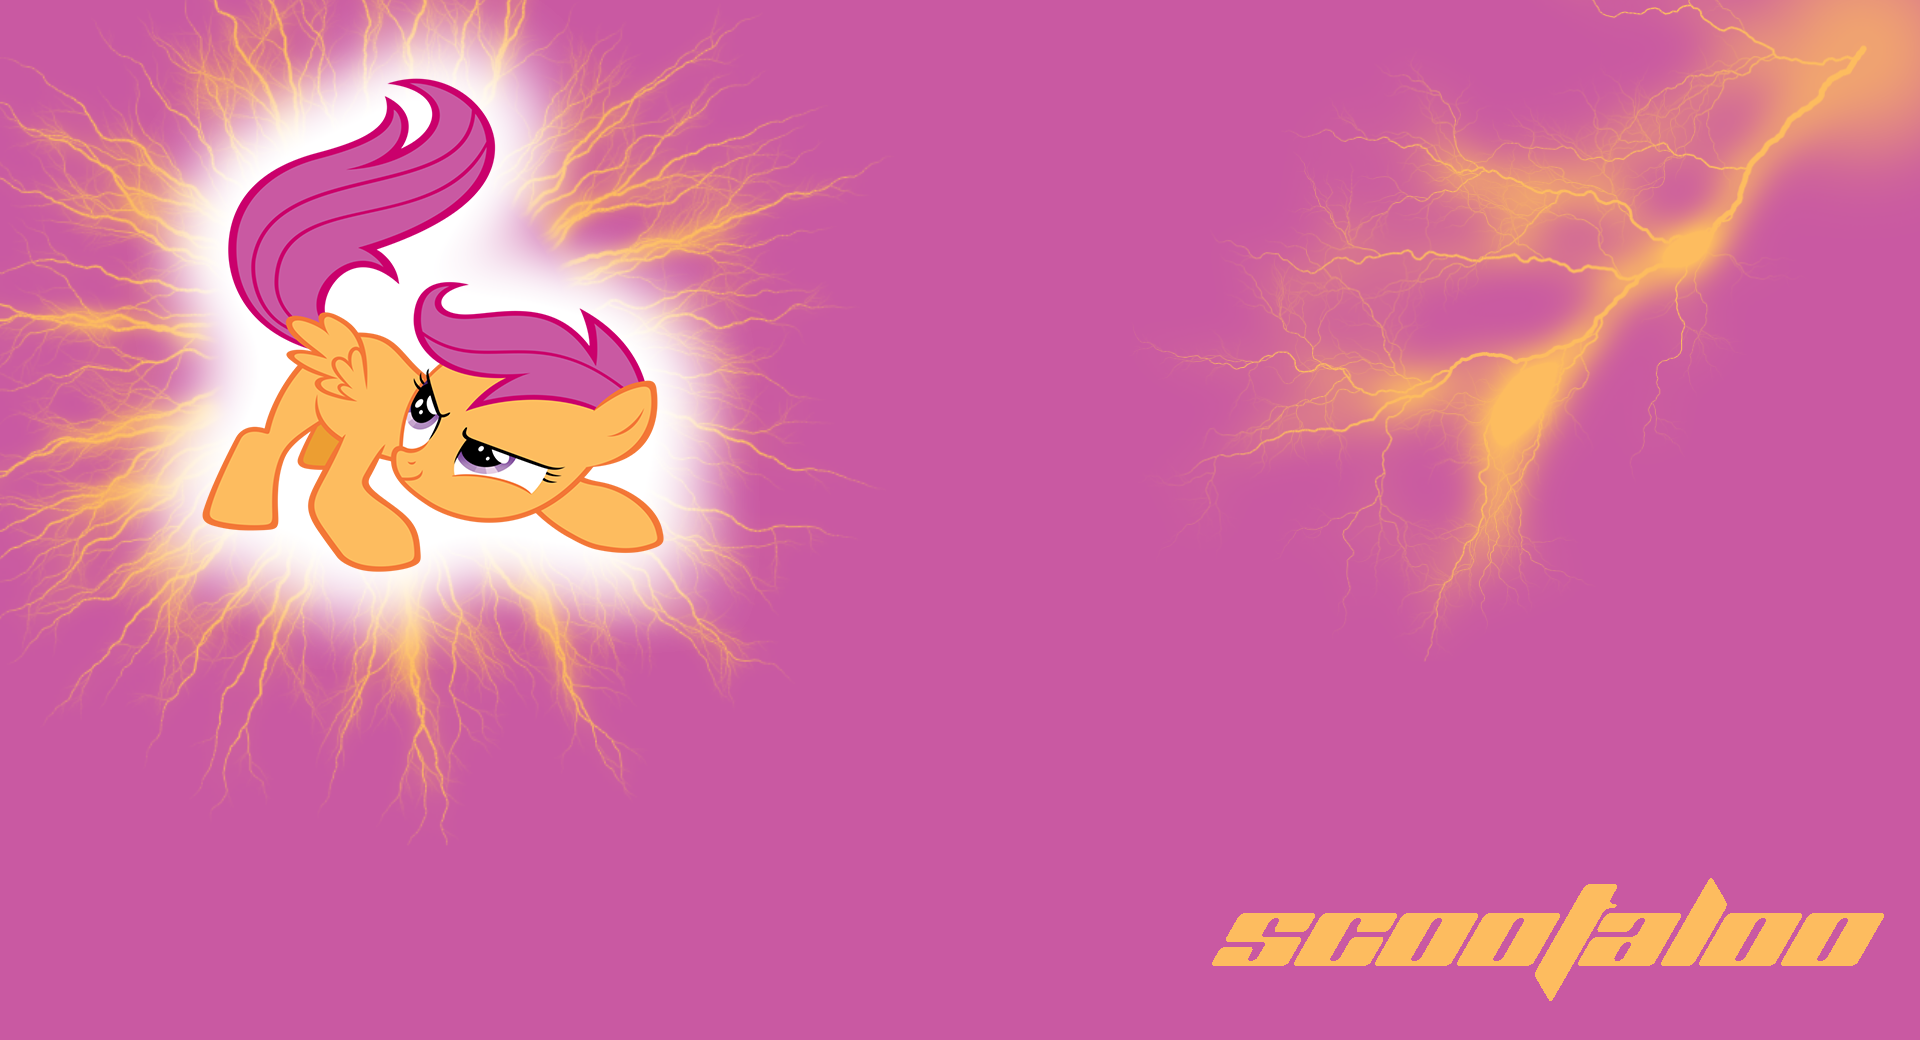 Scootaloo 'Spark' wallpaper by DjDa5h and Stabzor